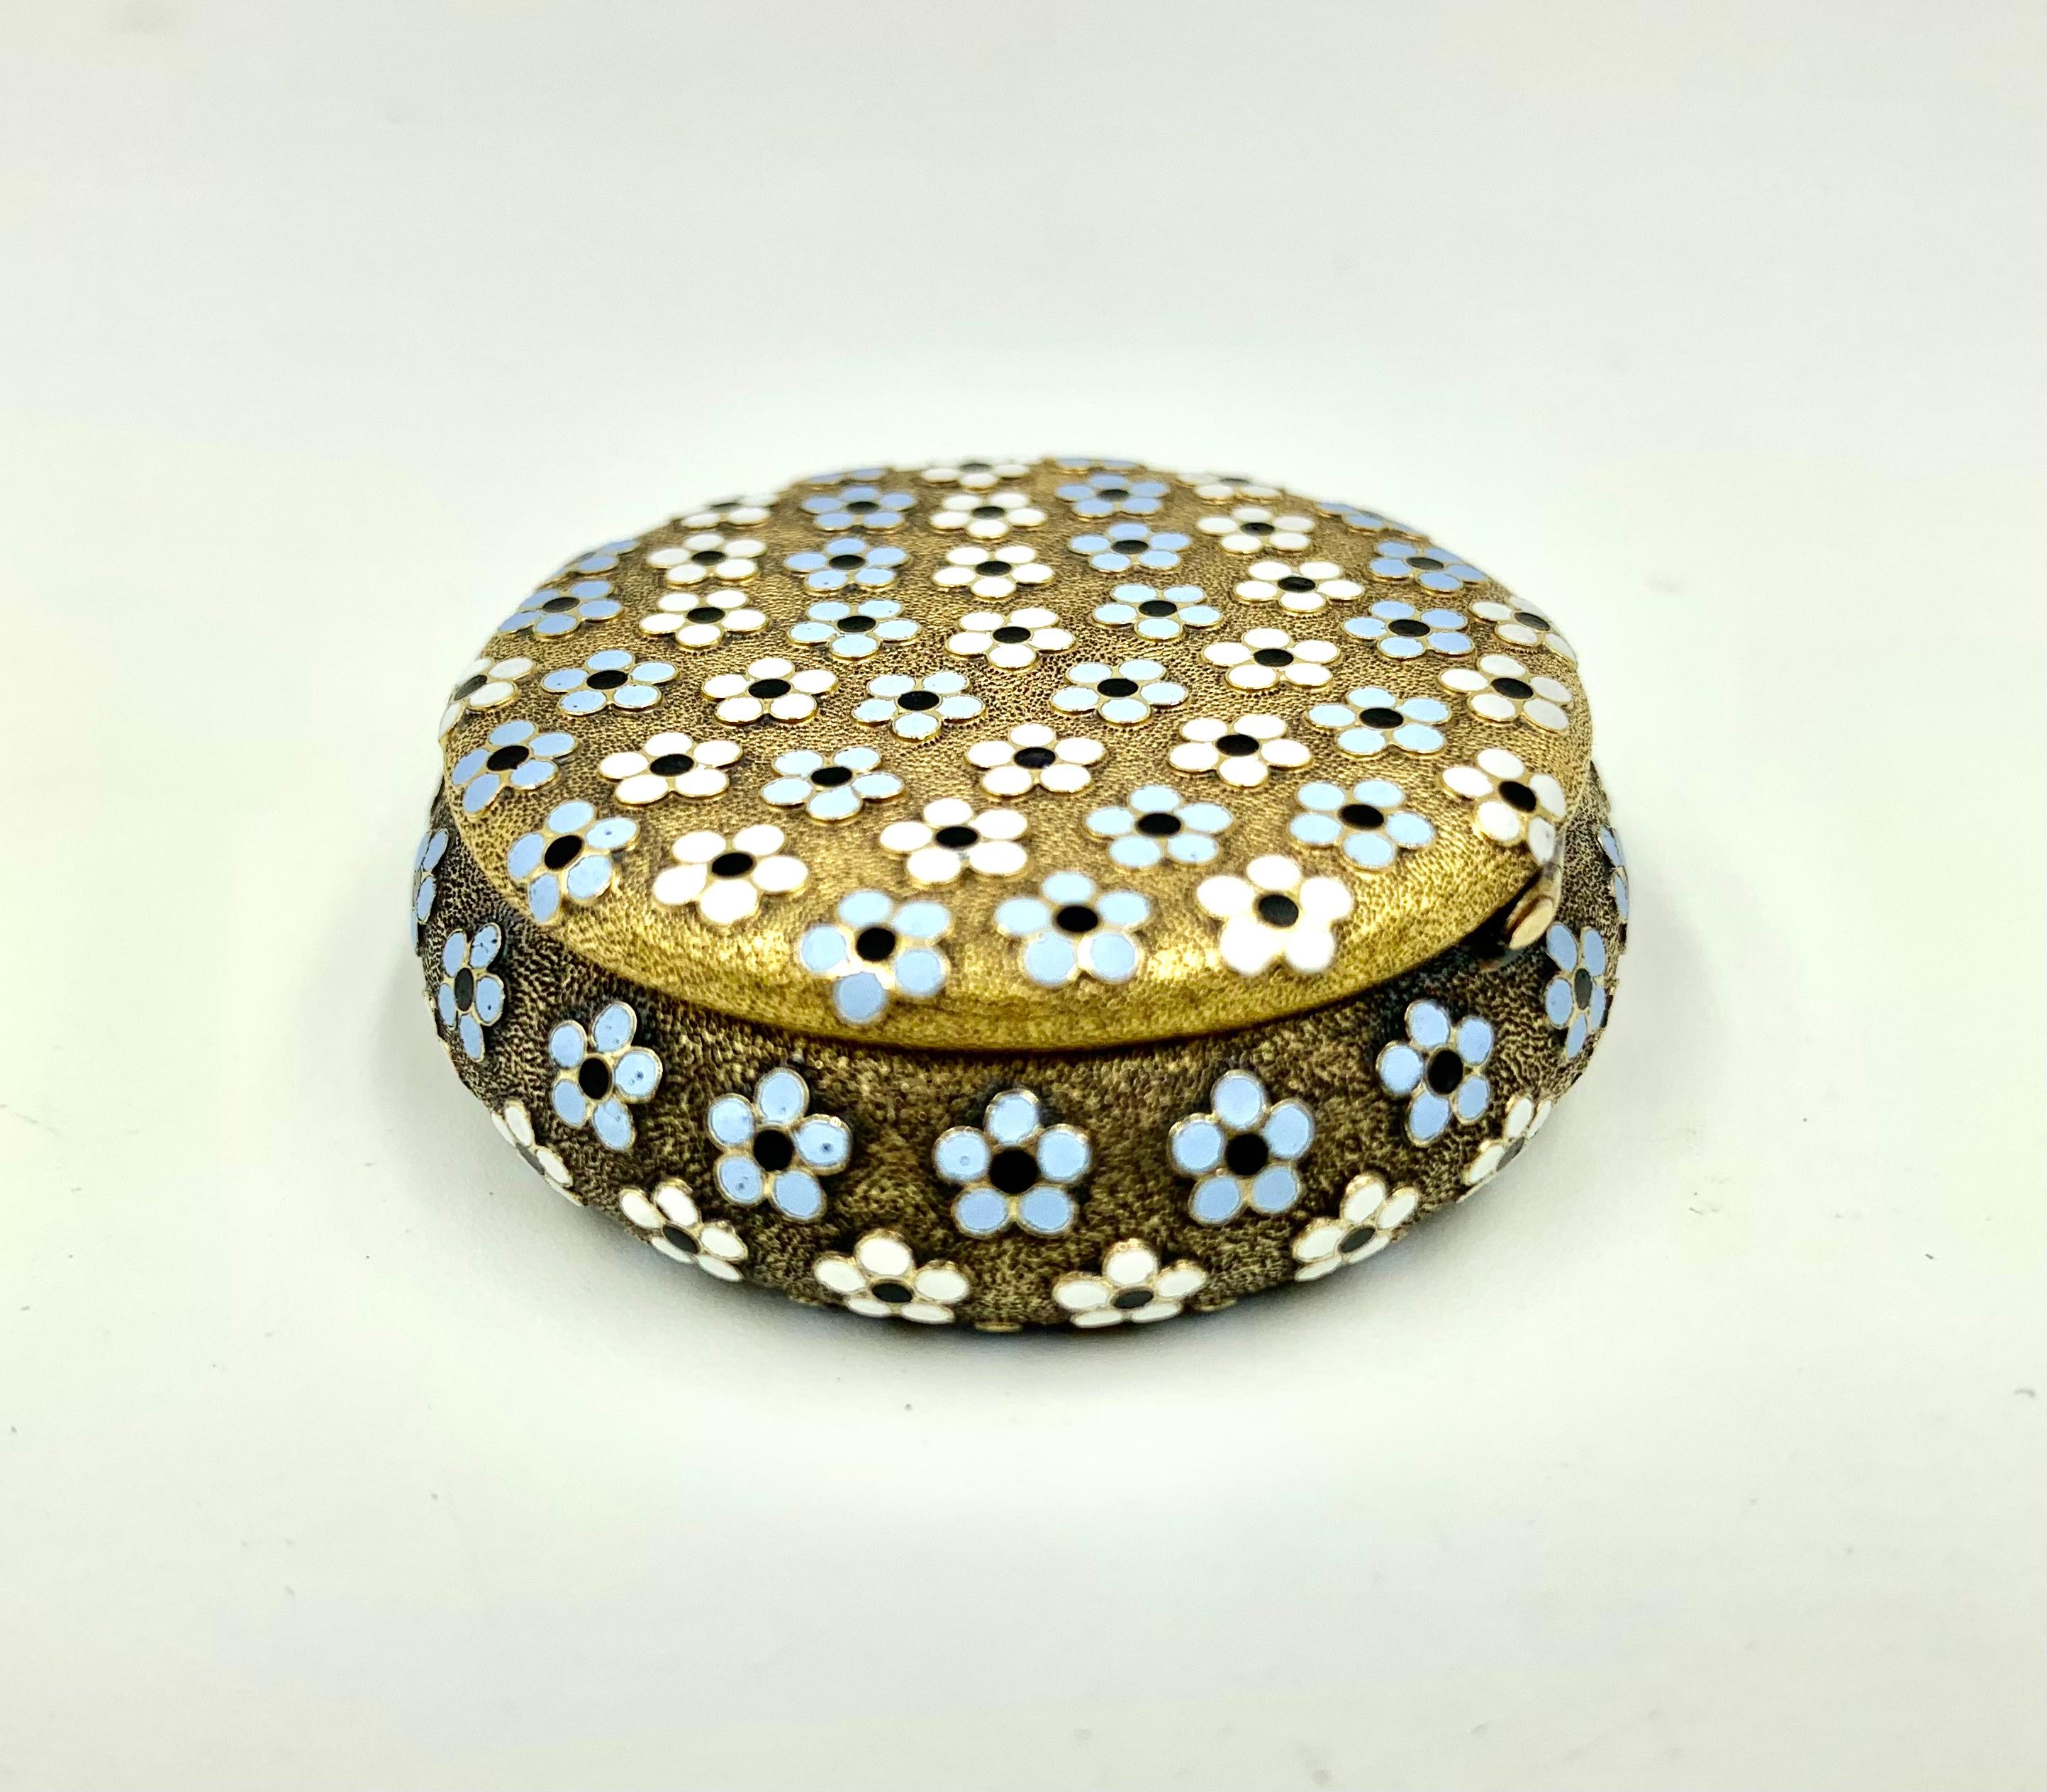 Antike 18 Karat Gelbgold Polychrome Emaille Forget Me Not Flowers Pill Box im Zustand „Gut“ im Angebot in New York, NY